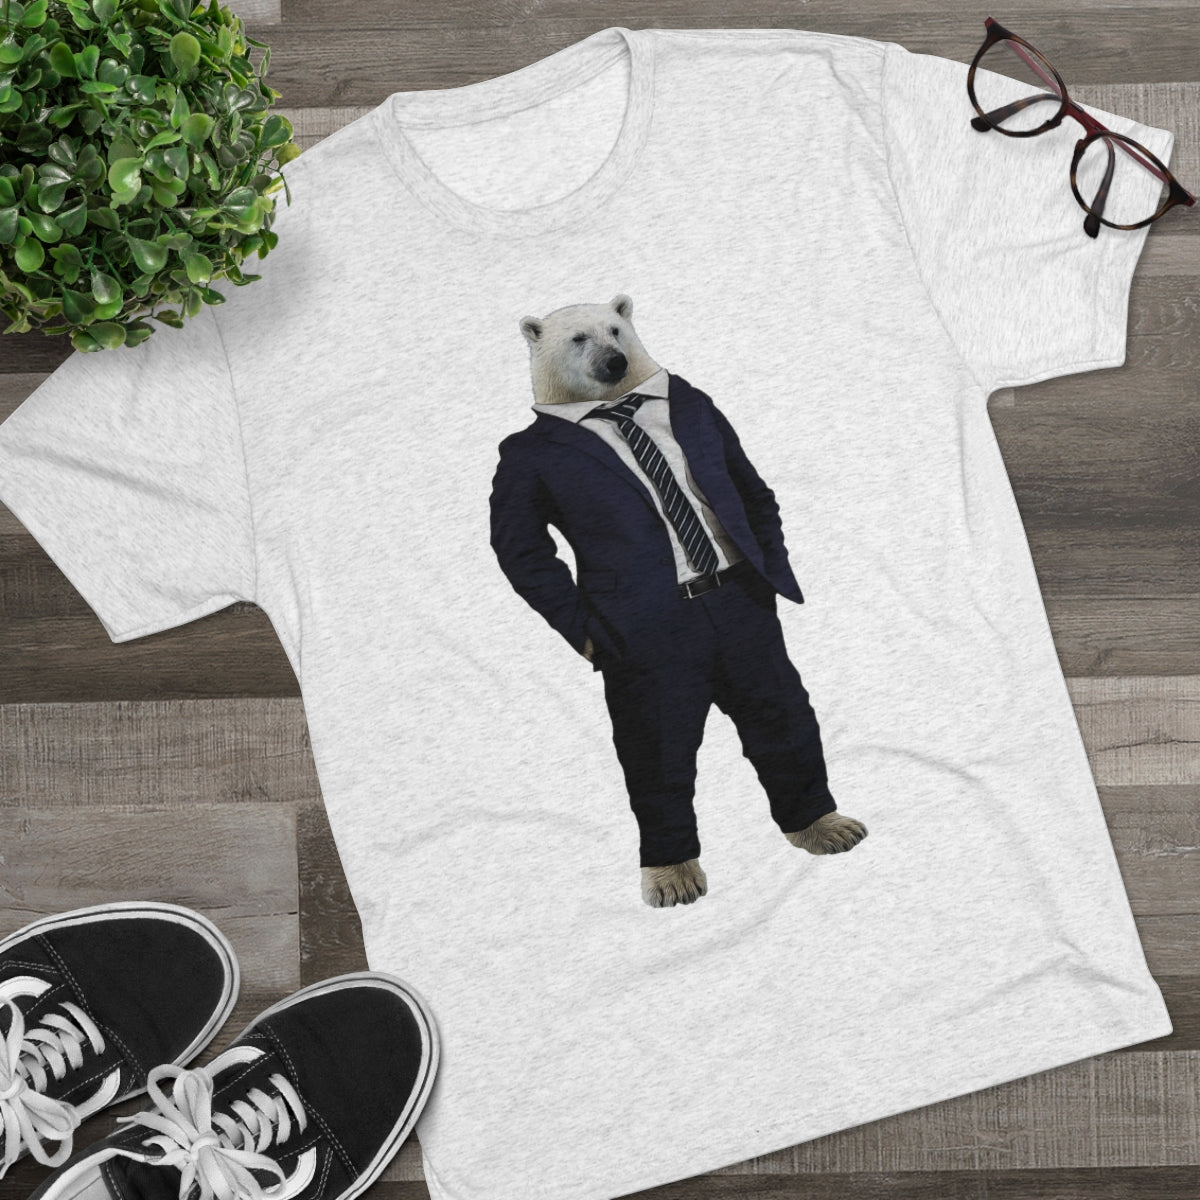 Don't Ask Me Why! Polar bear in a suit- Men